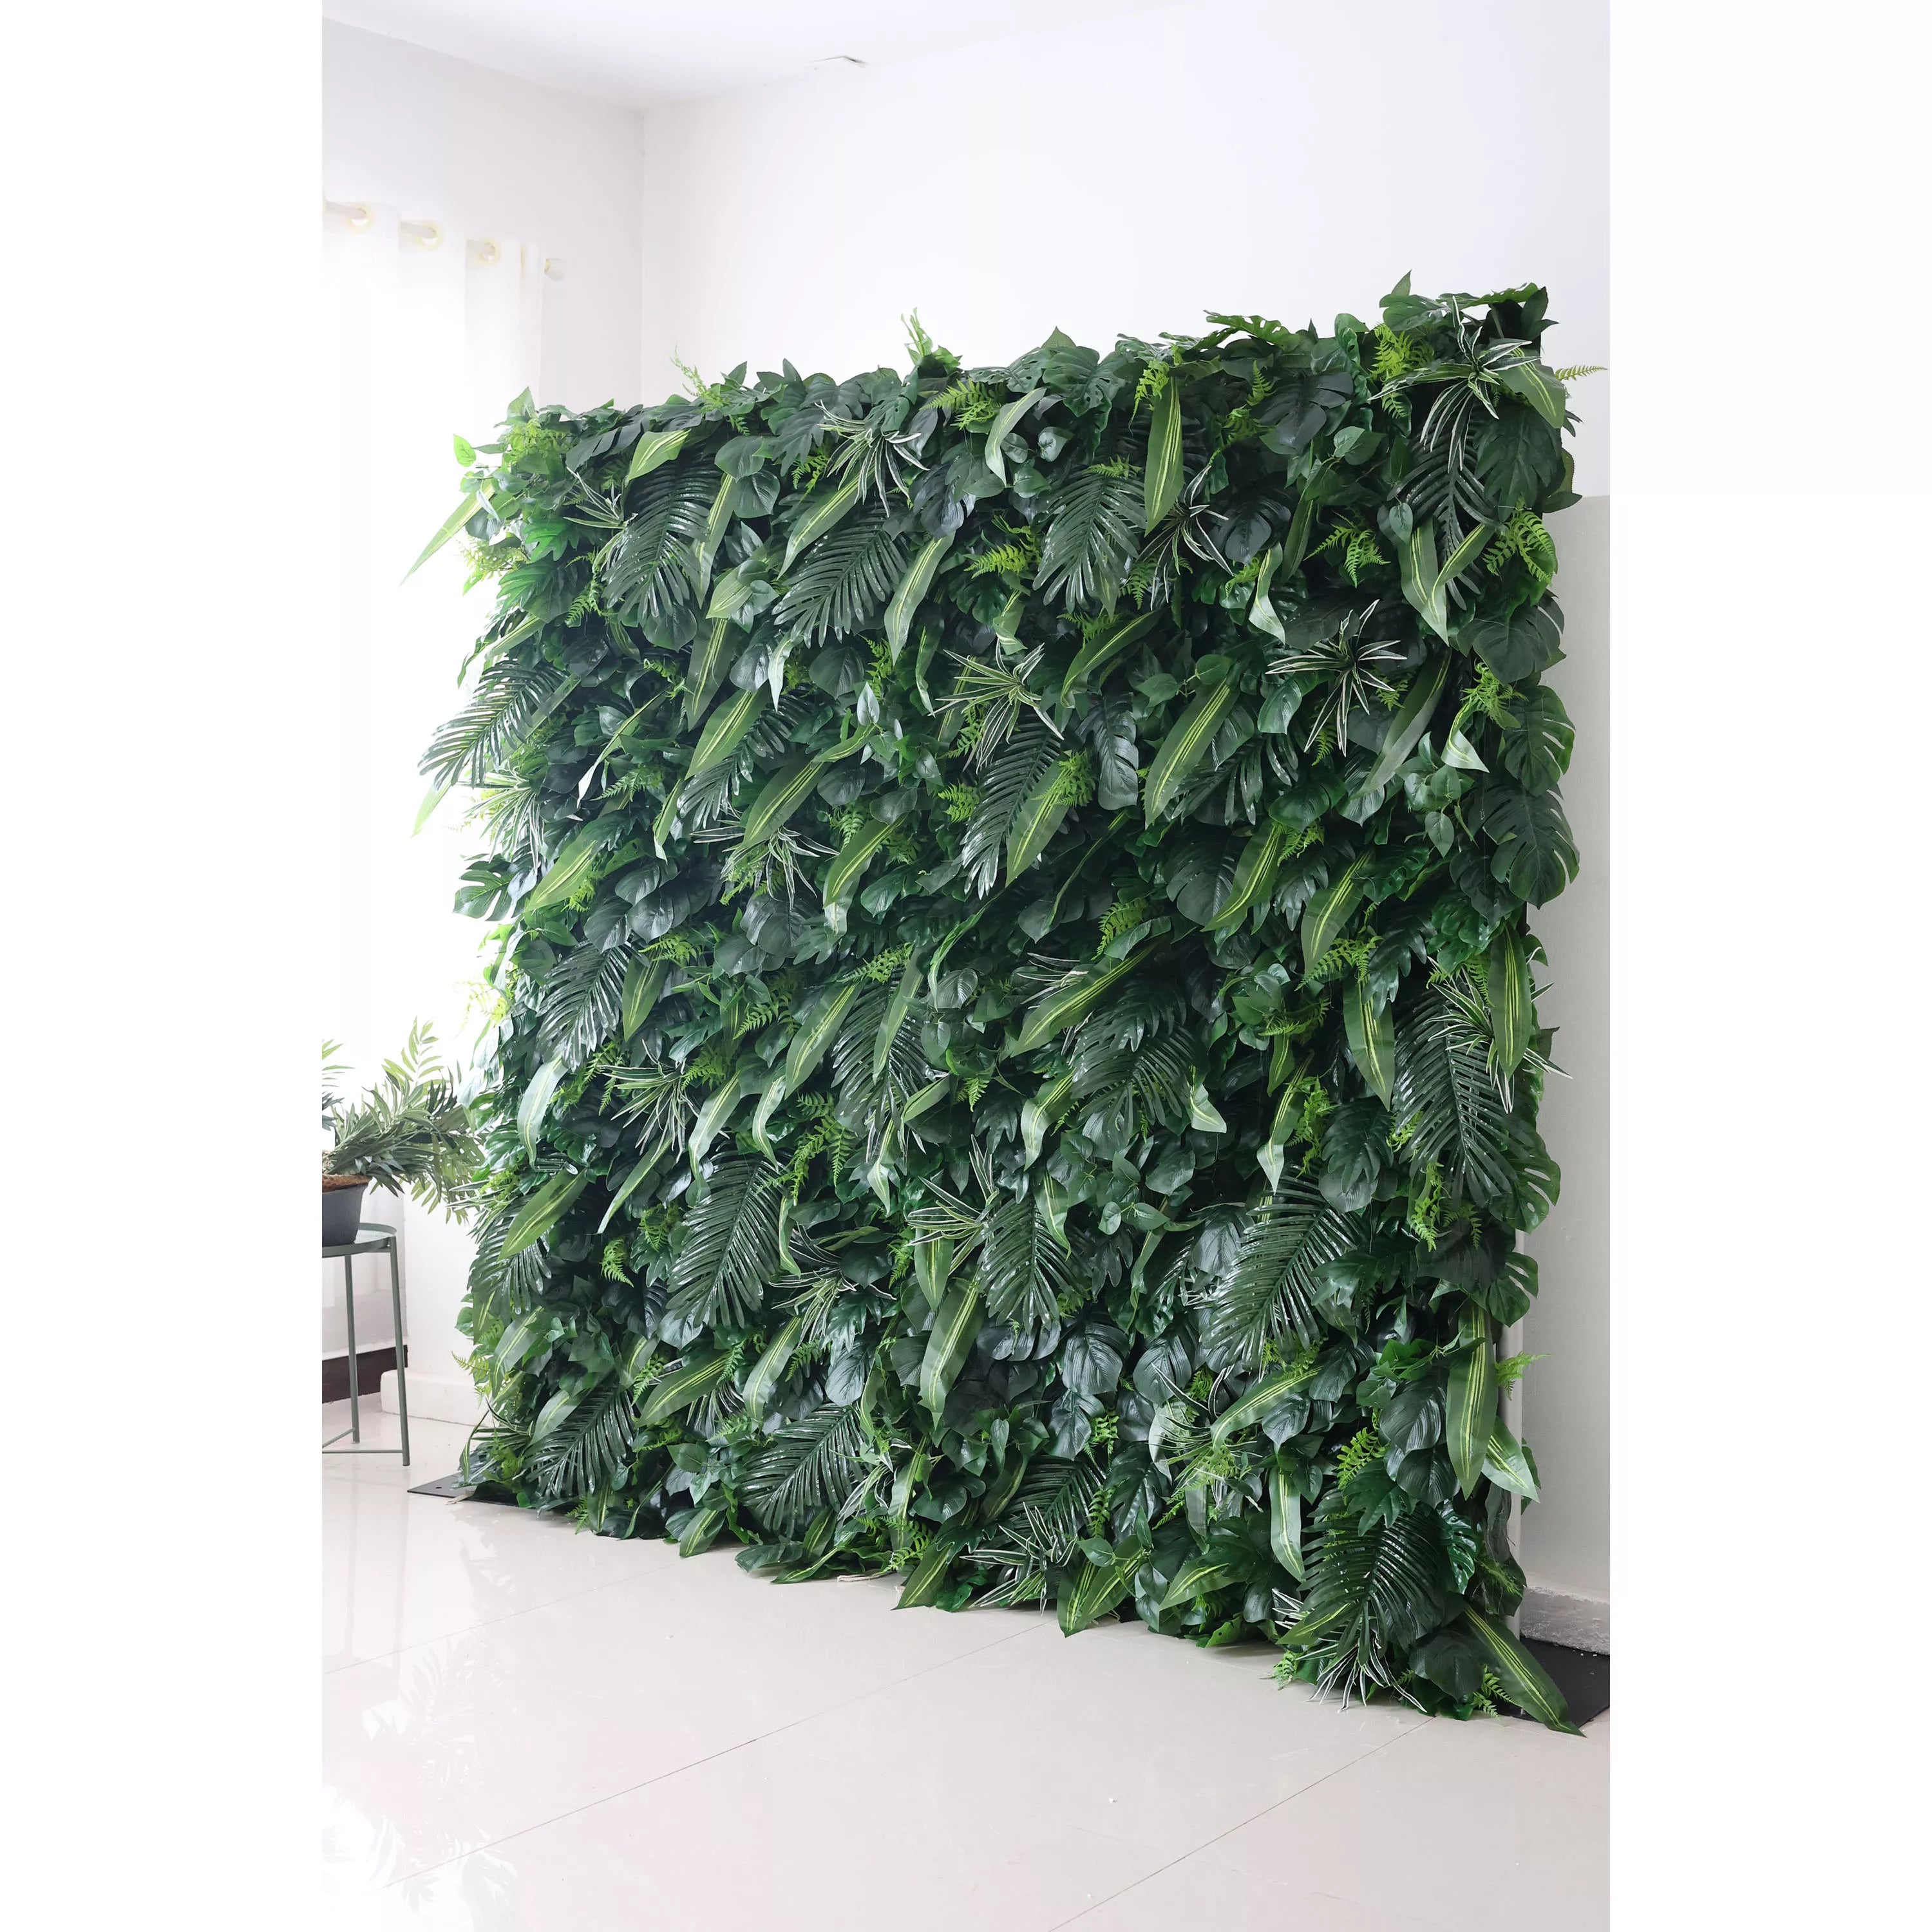 Valar Foliage Roll Up Backdrop: Revel in the Verdant Rainforest's lush greens. From vibrant leaves to layered fronds, it's a tropical oasis. Choose Valar for a botanical immersion at your next gathering.